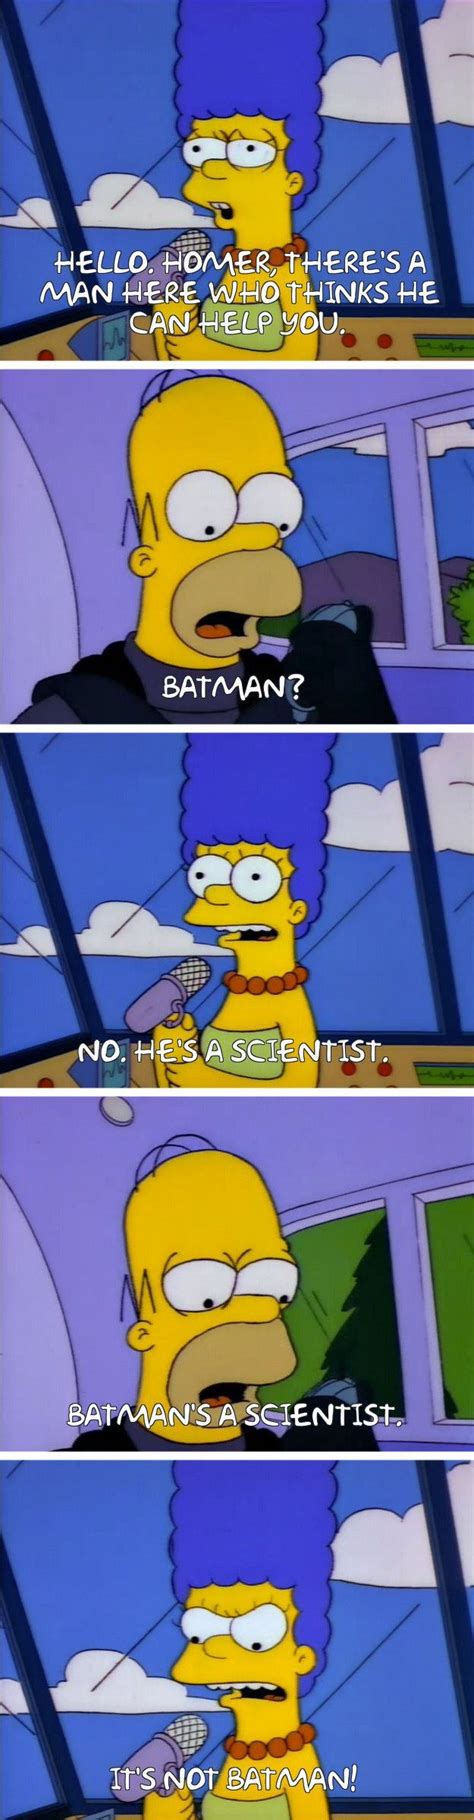 29 Homer Simpson Quotes Guaranteed To Make You Laugh Every Time Homer